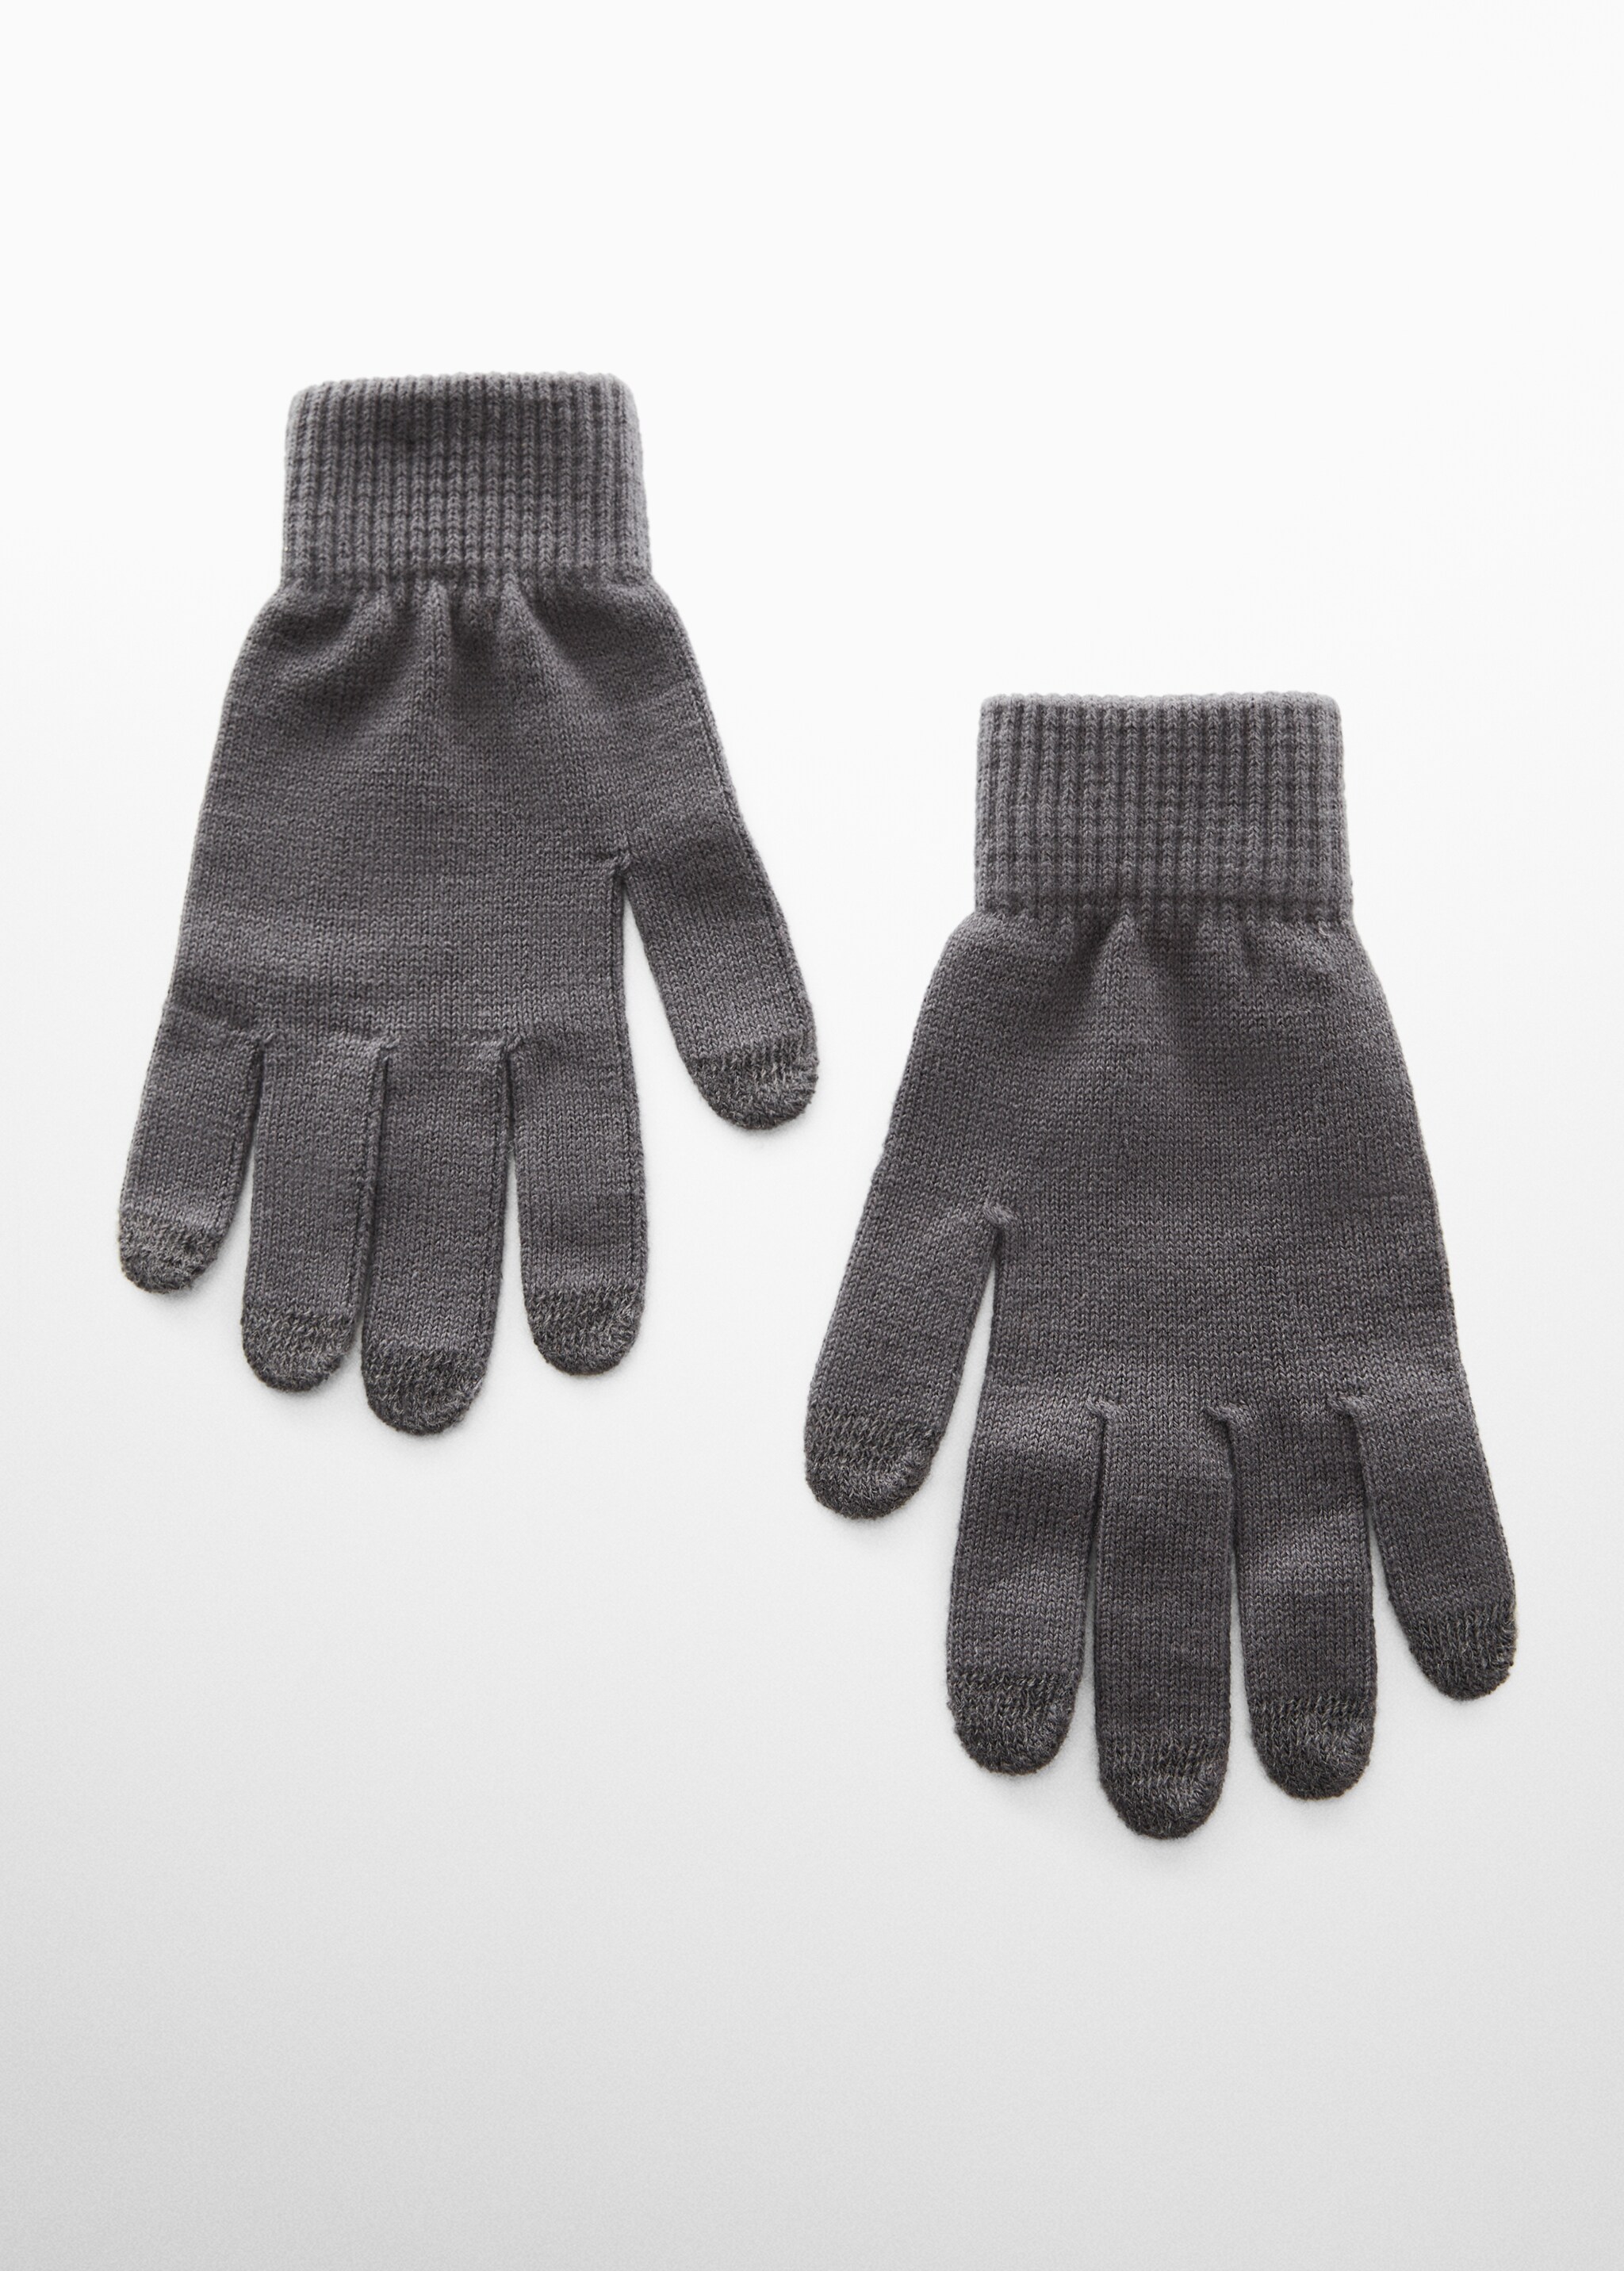 Touchscreen knitted gloves - Article without model